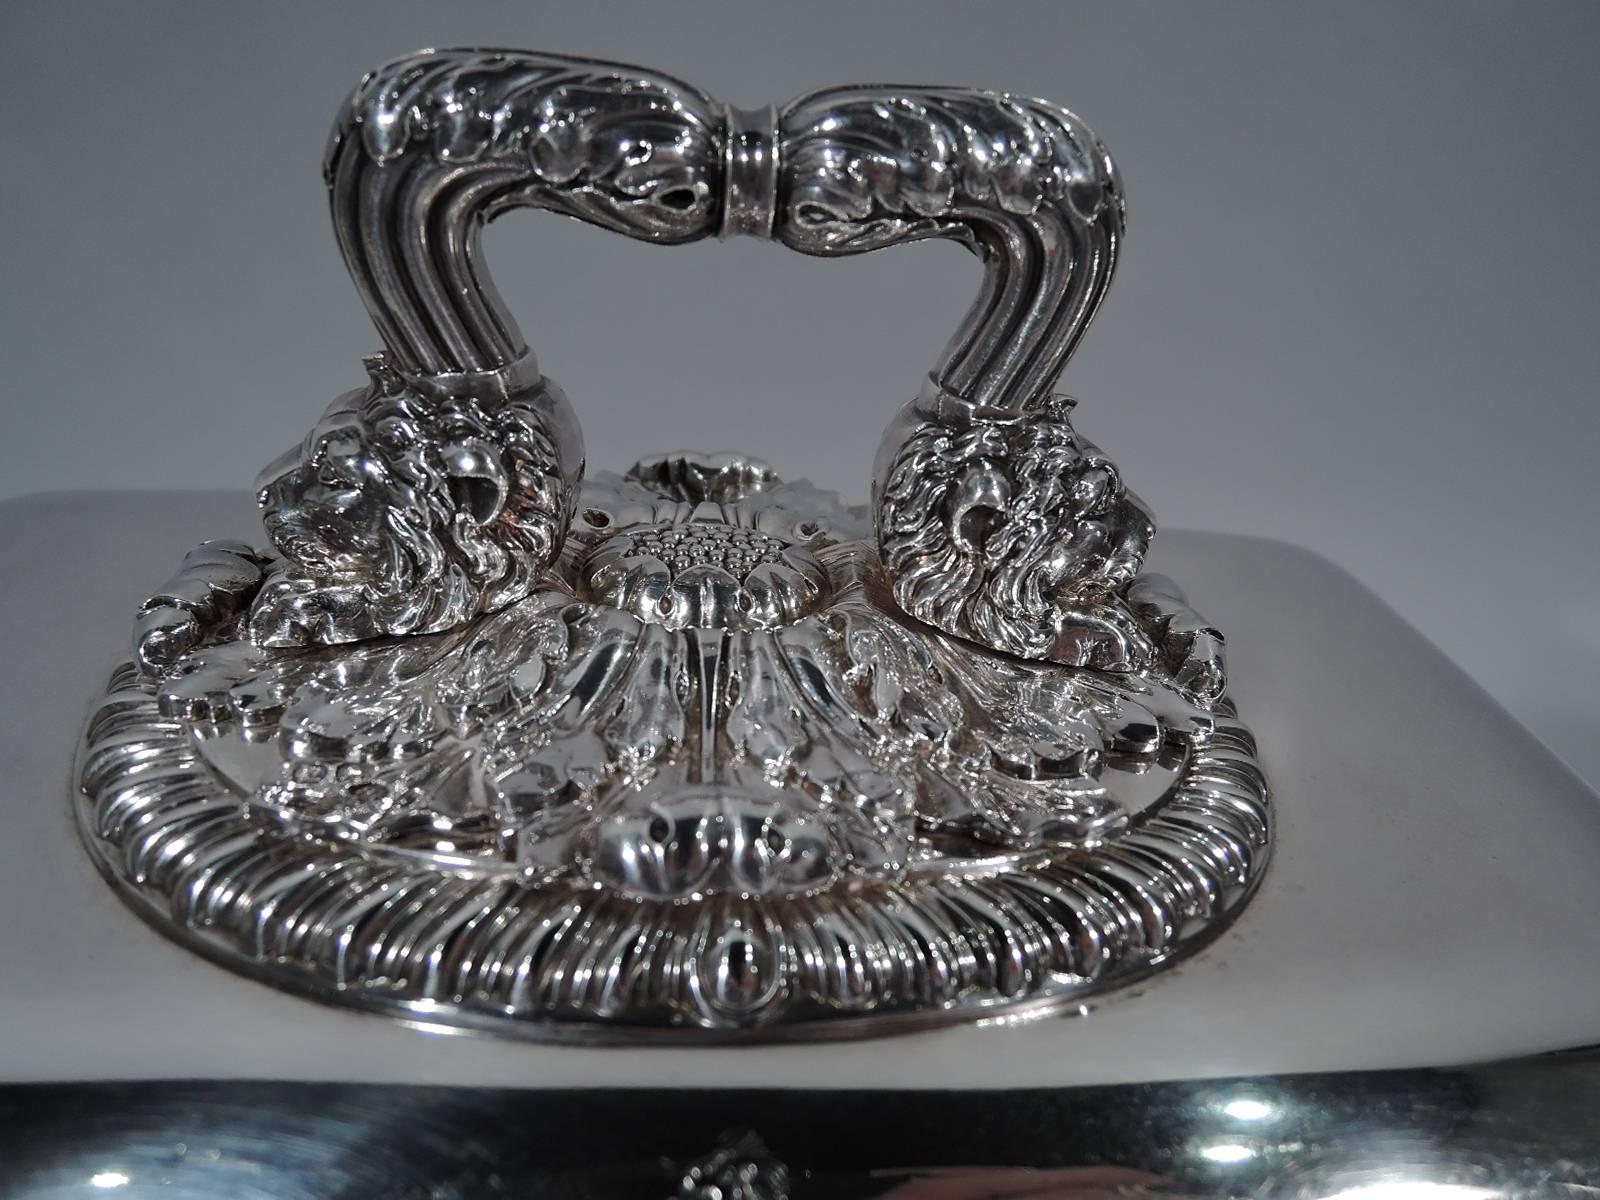 Sheffield Plate Pair of English Regency Sterling Silver Covered Serving Dishes by Paul Storr